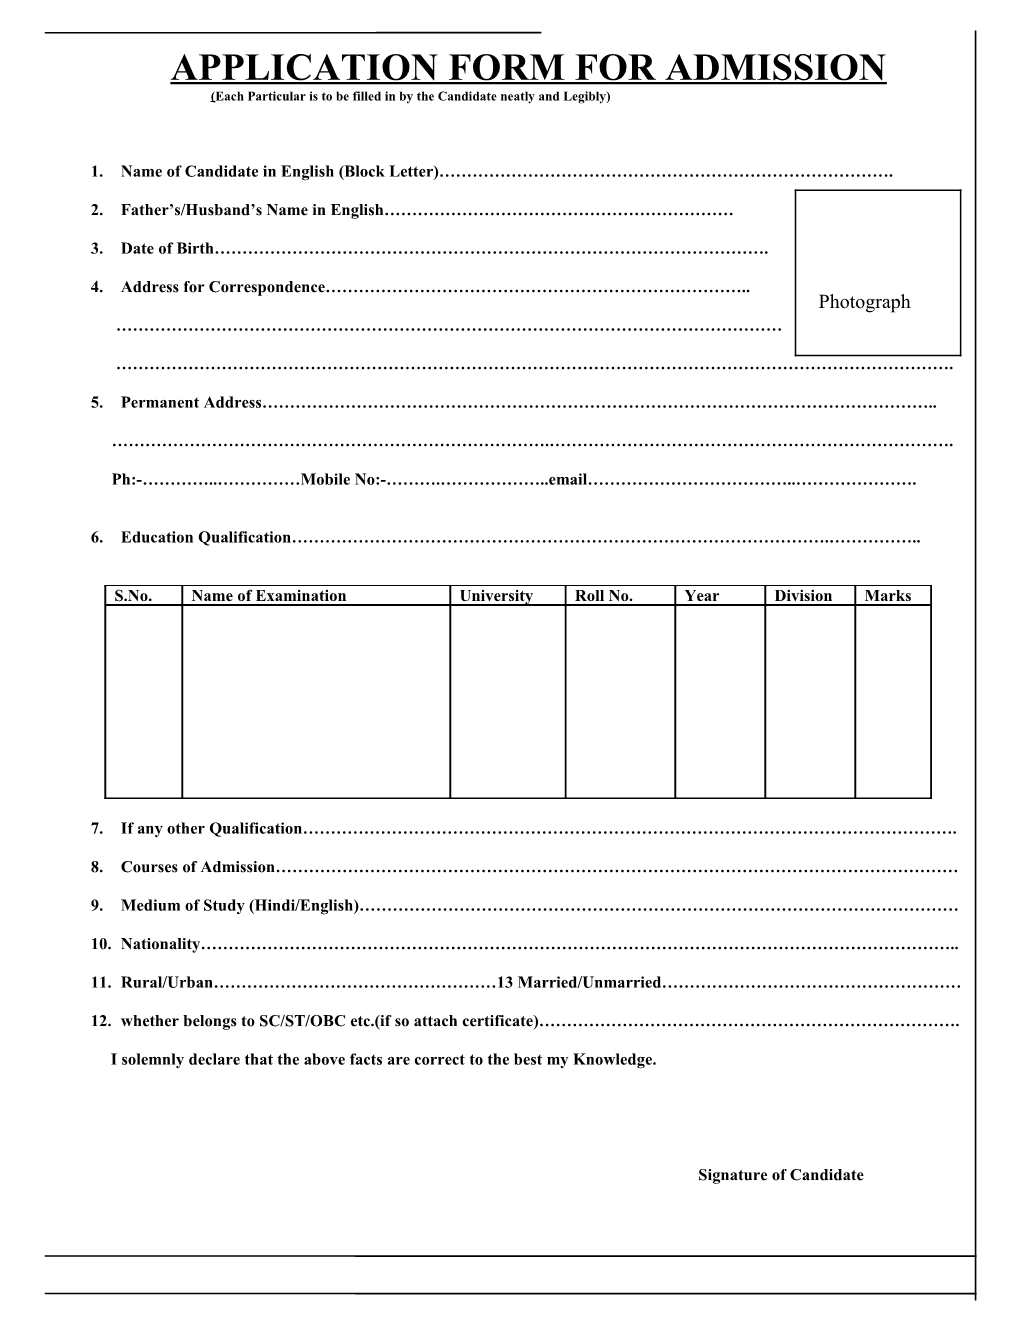 Application Form for Admission